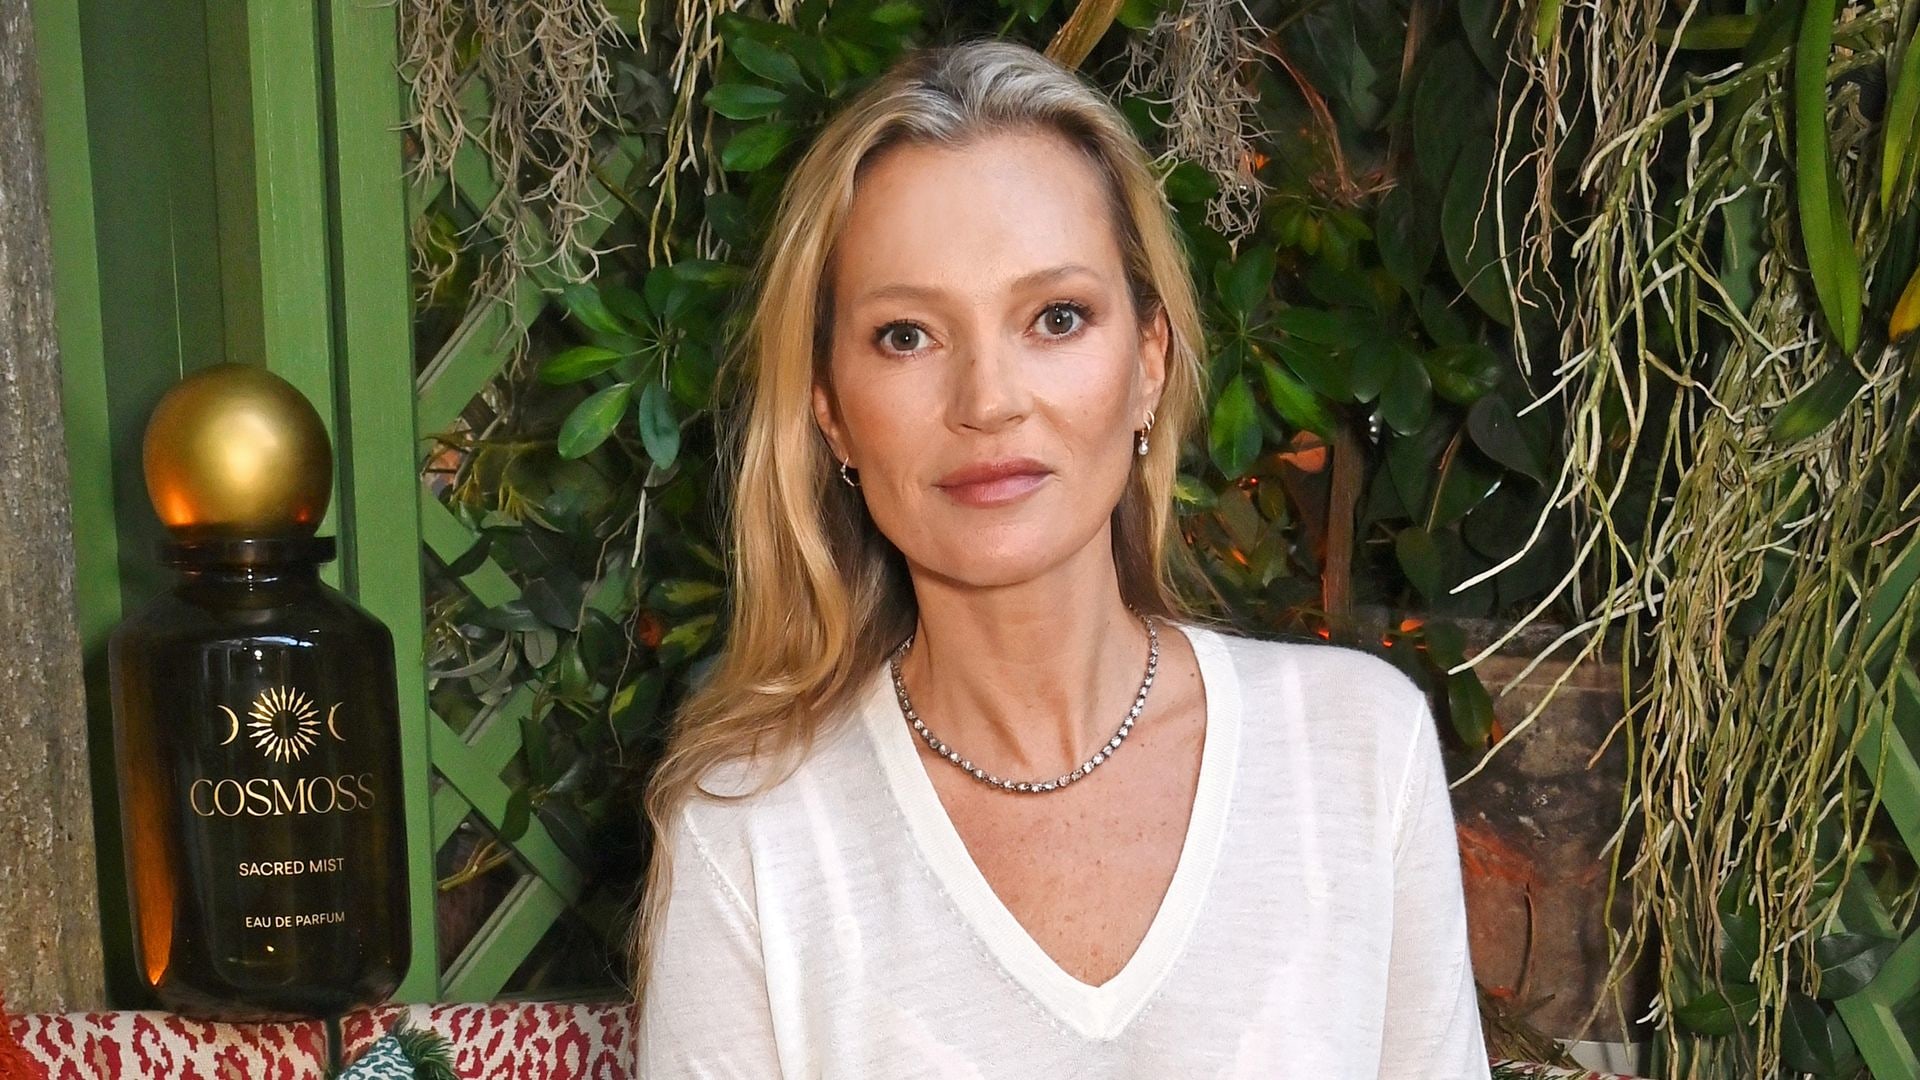 Kate Moss celebrates one year of Cosmoss with a luxurious breakfast at Annabel's